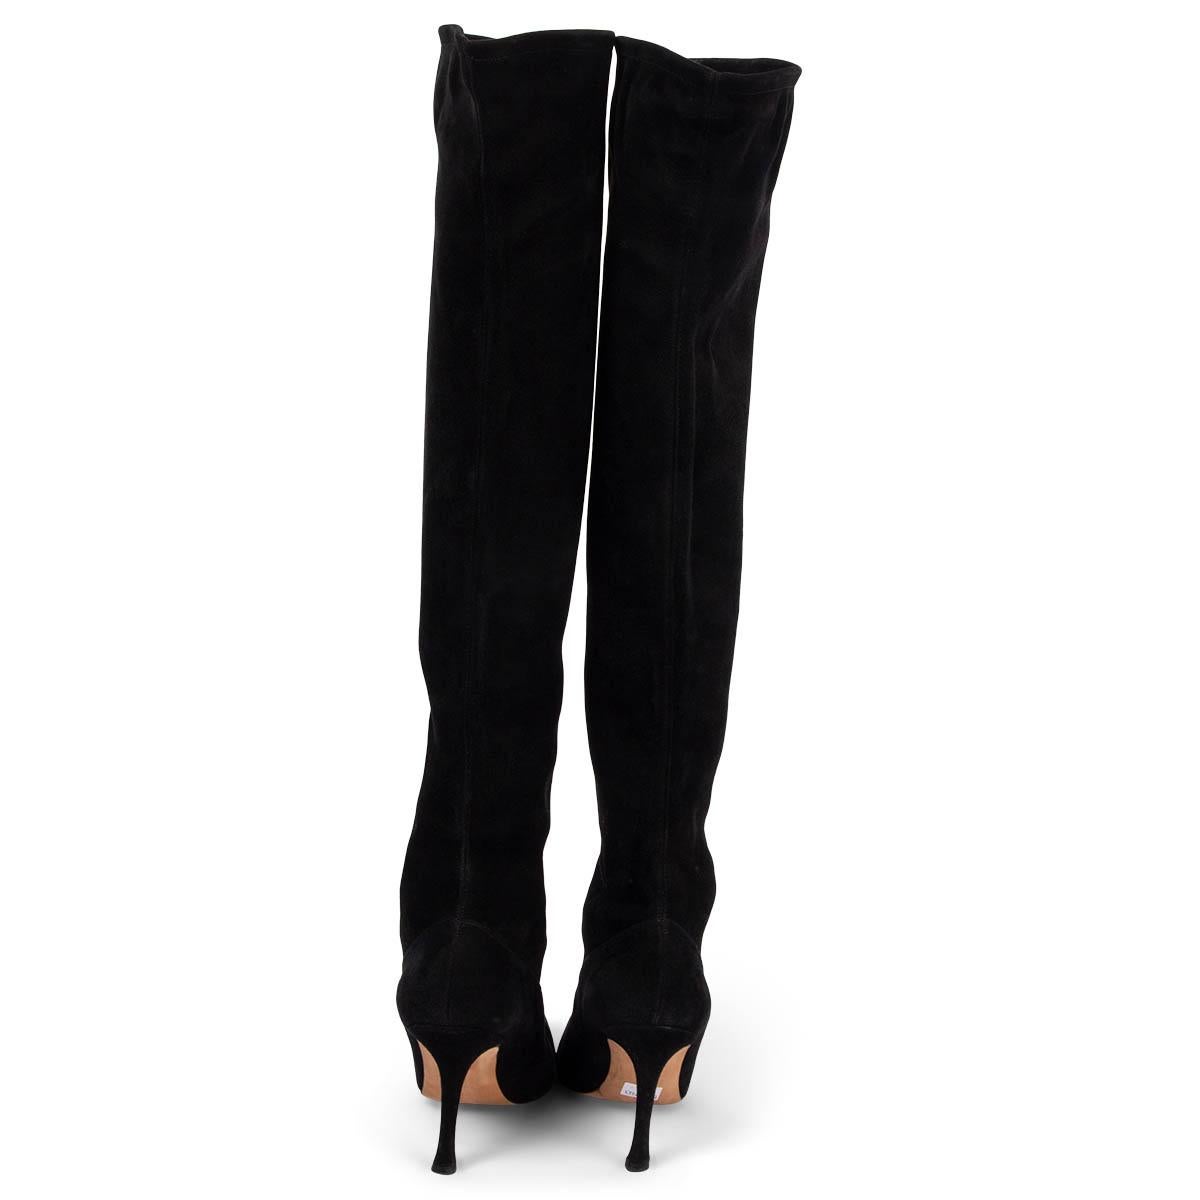 Black MANOLO BLAHNIK black suede Pointed Toe Knee High Boots Shoes 36 For Sale